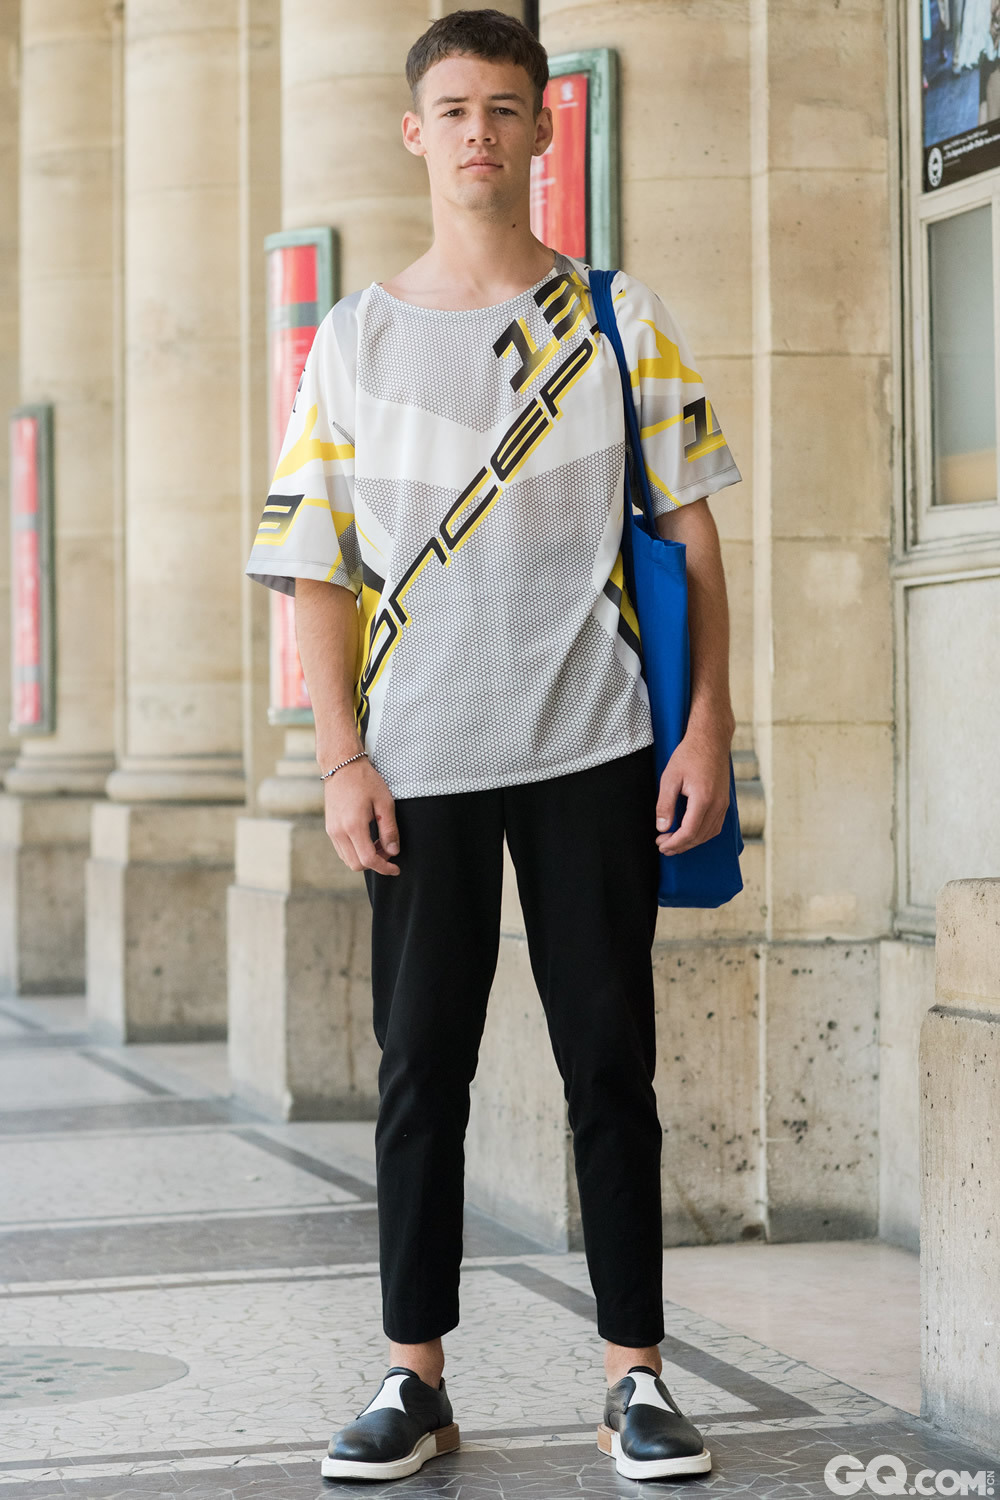 Hugo
Shirt: Etudes Studio
Trousers: COS
Shoes: Moby
Bag: Etudes Studio

Inspiration: I am French and I like Etudes Studio a lot. Today they are showing and therefor they inspired me. 
（我是法国人，非常喜欢Etudes Studio，今天是他们的秀也恰好赋予了我灵感。）